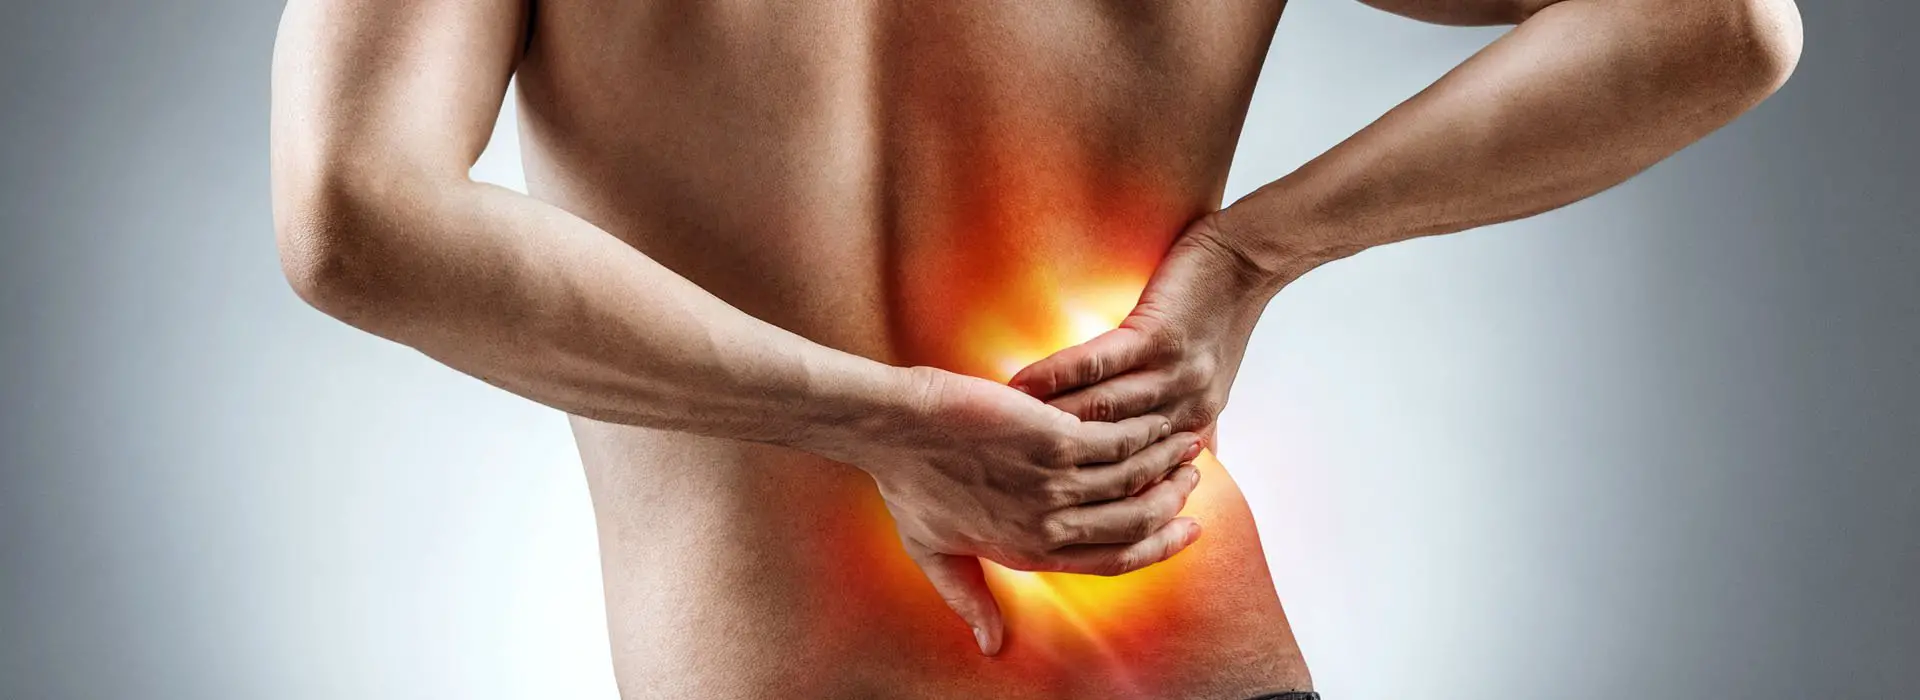 3 Missed Causes of Back Pain and Sciatica. Which one do ...